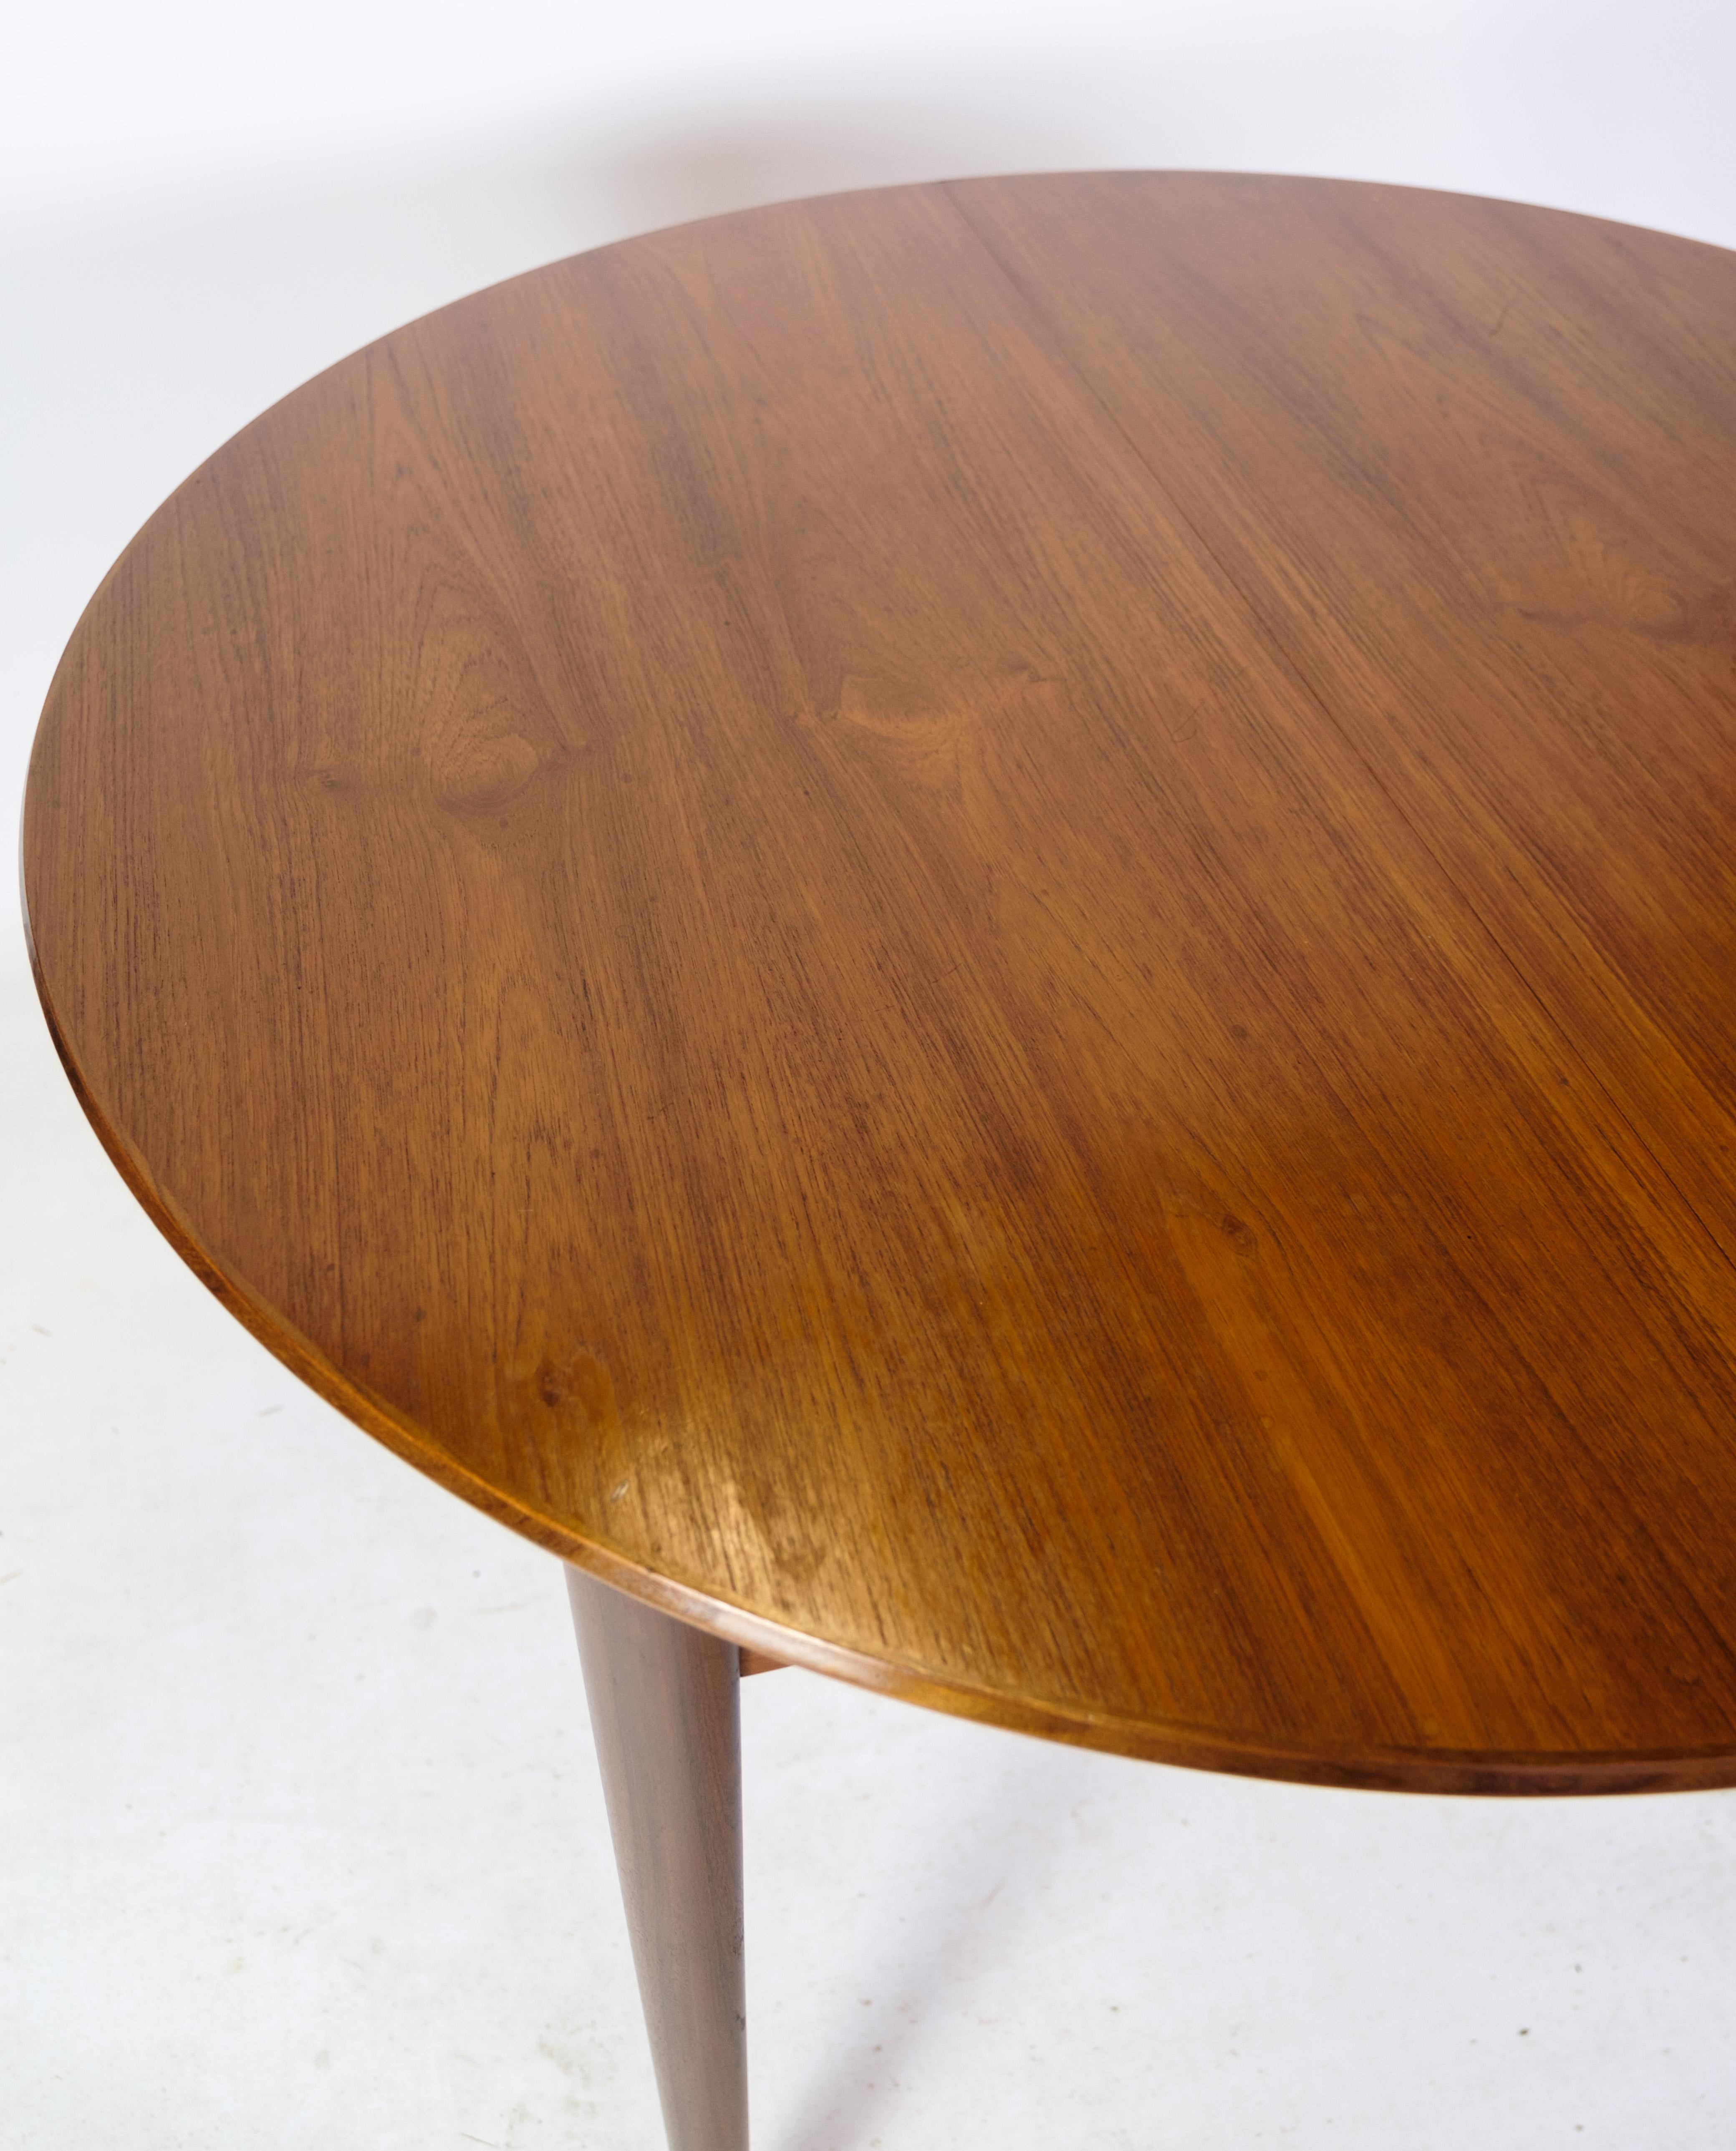 Scandinavian Modern Dining table In Teak wood of Danish Design From the 1960 For Sale